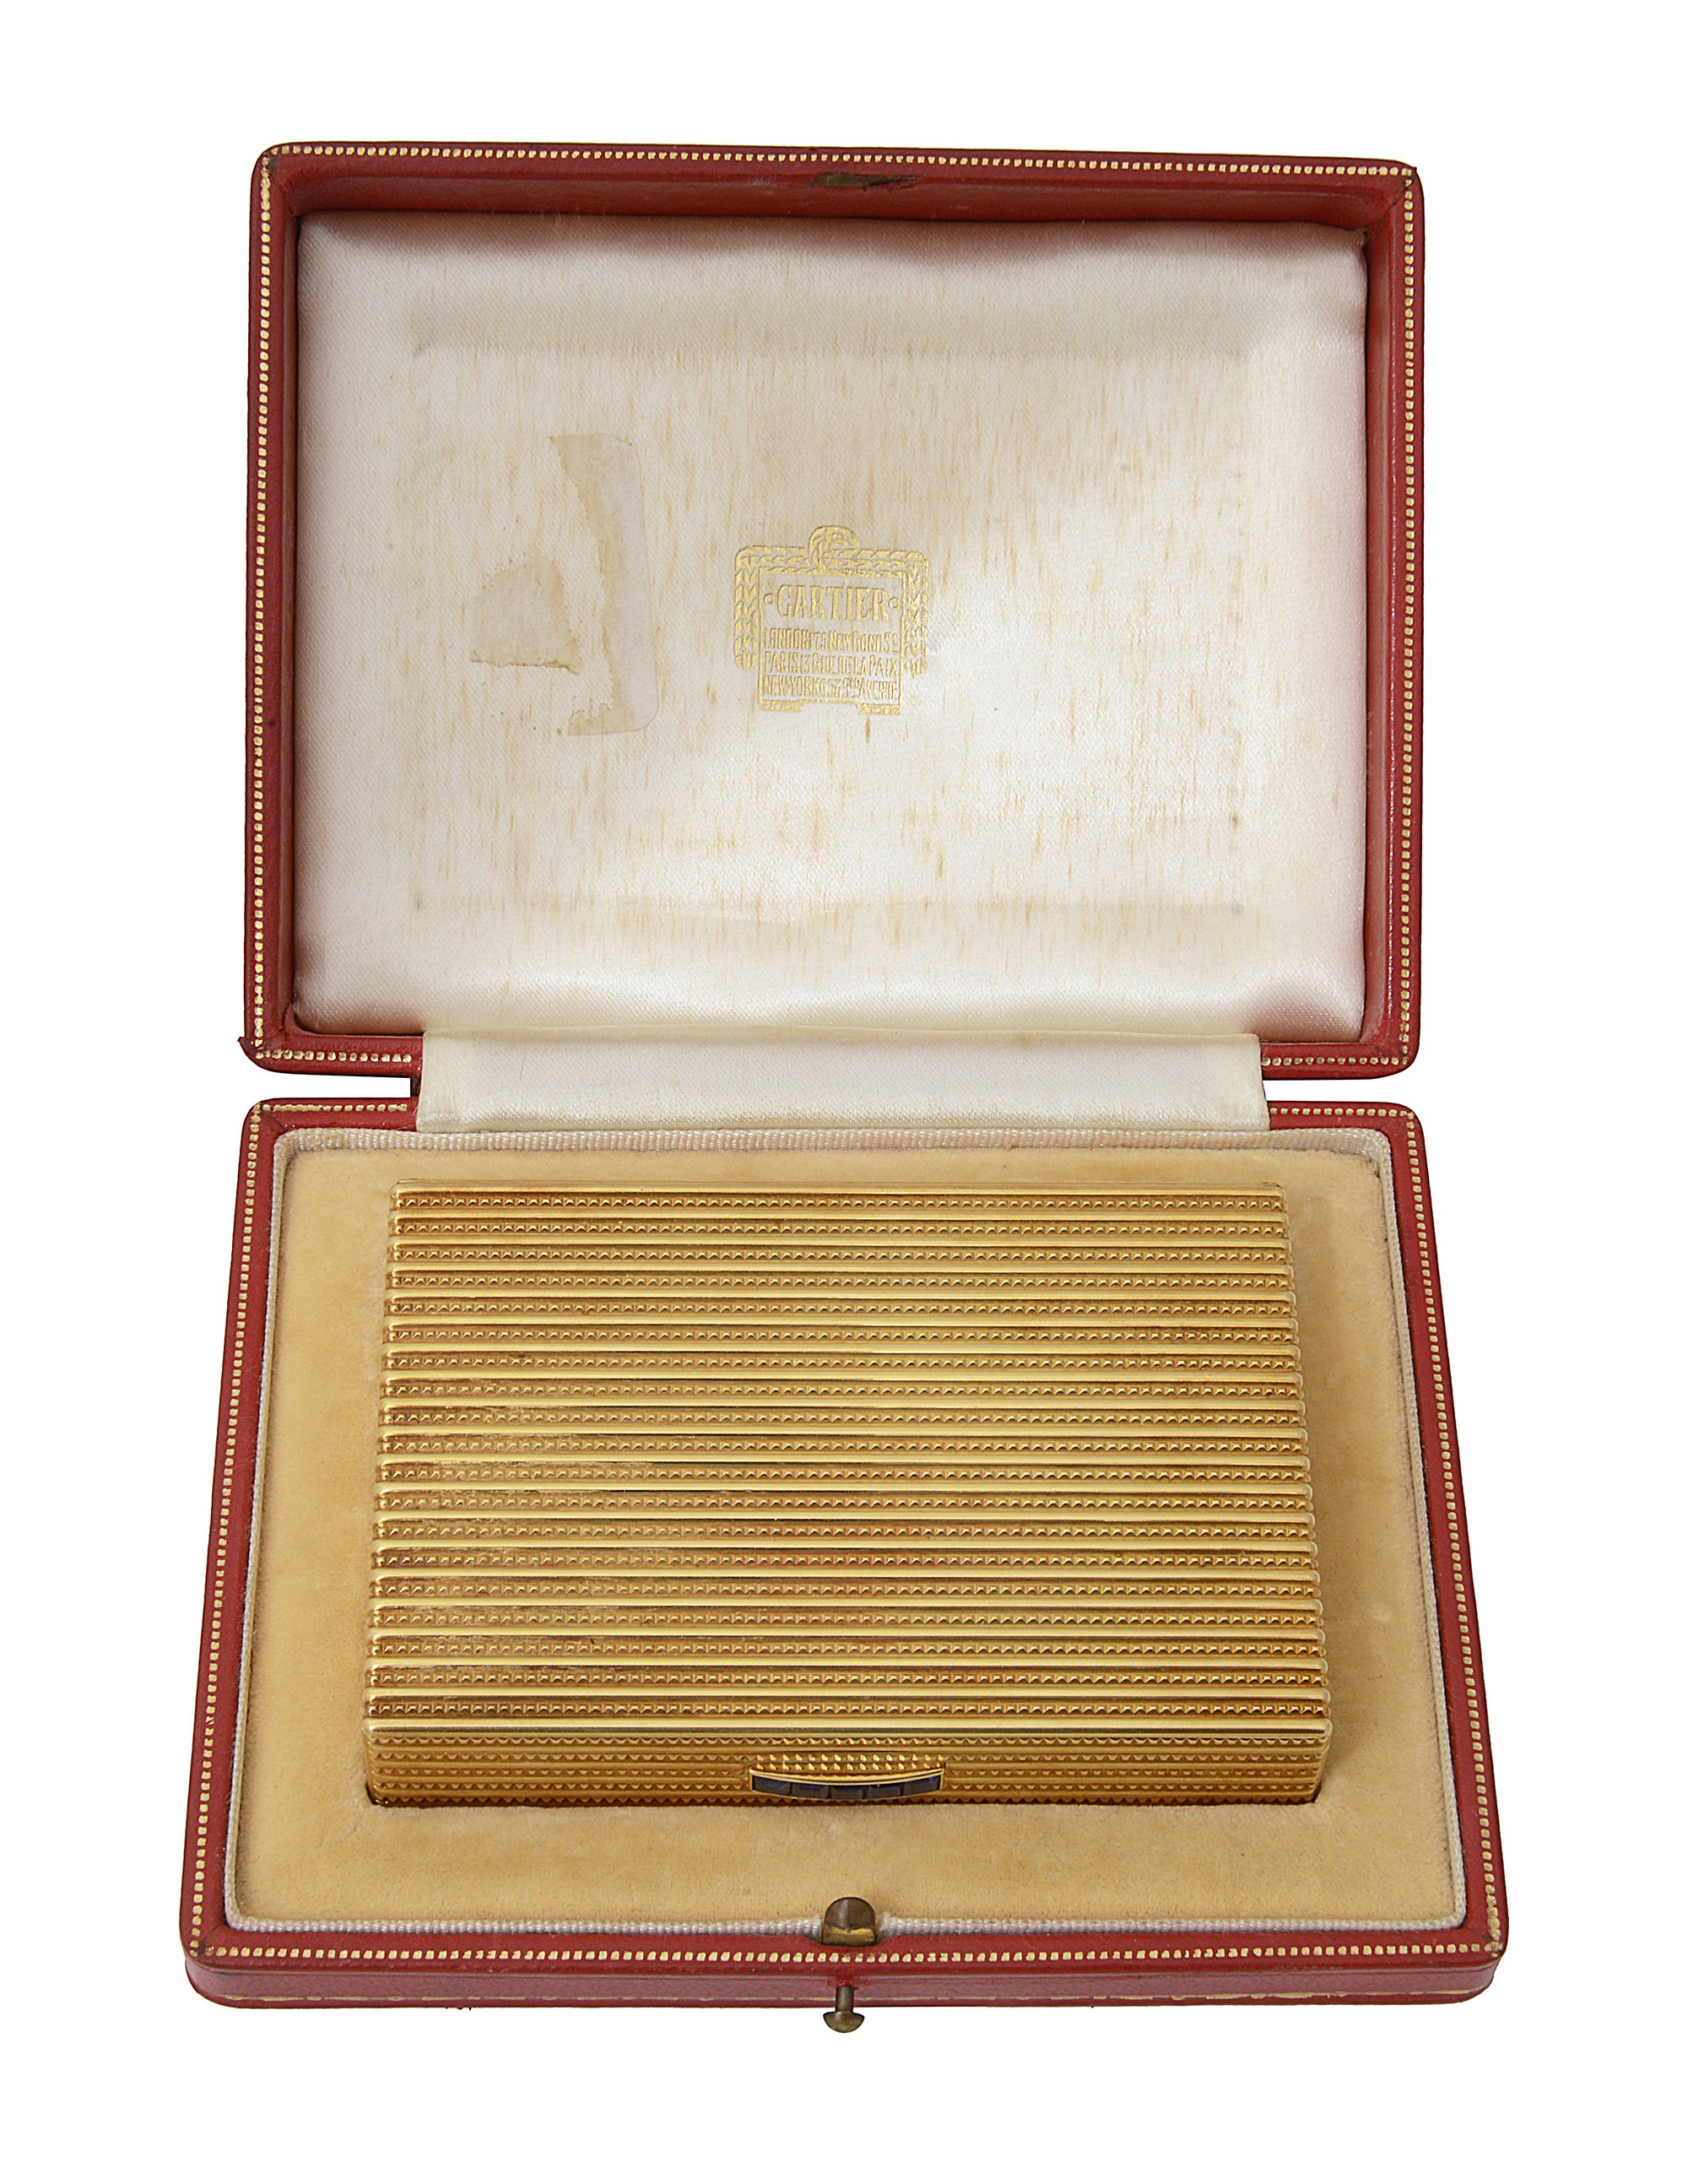 An 18ct gold and sapphire Cartier cigarette case in fitted case - Image 2 of 5